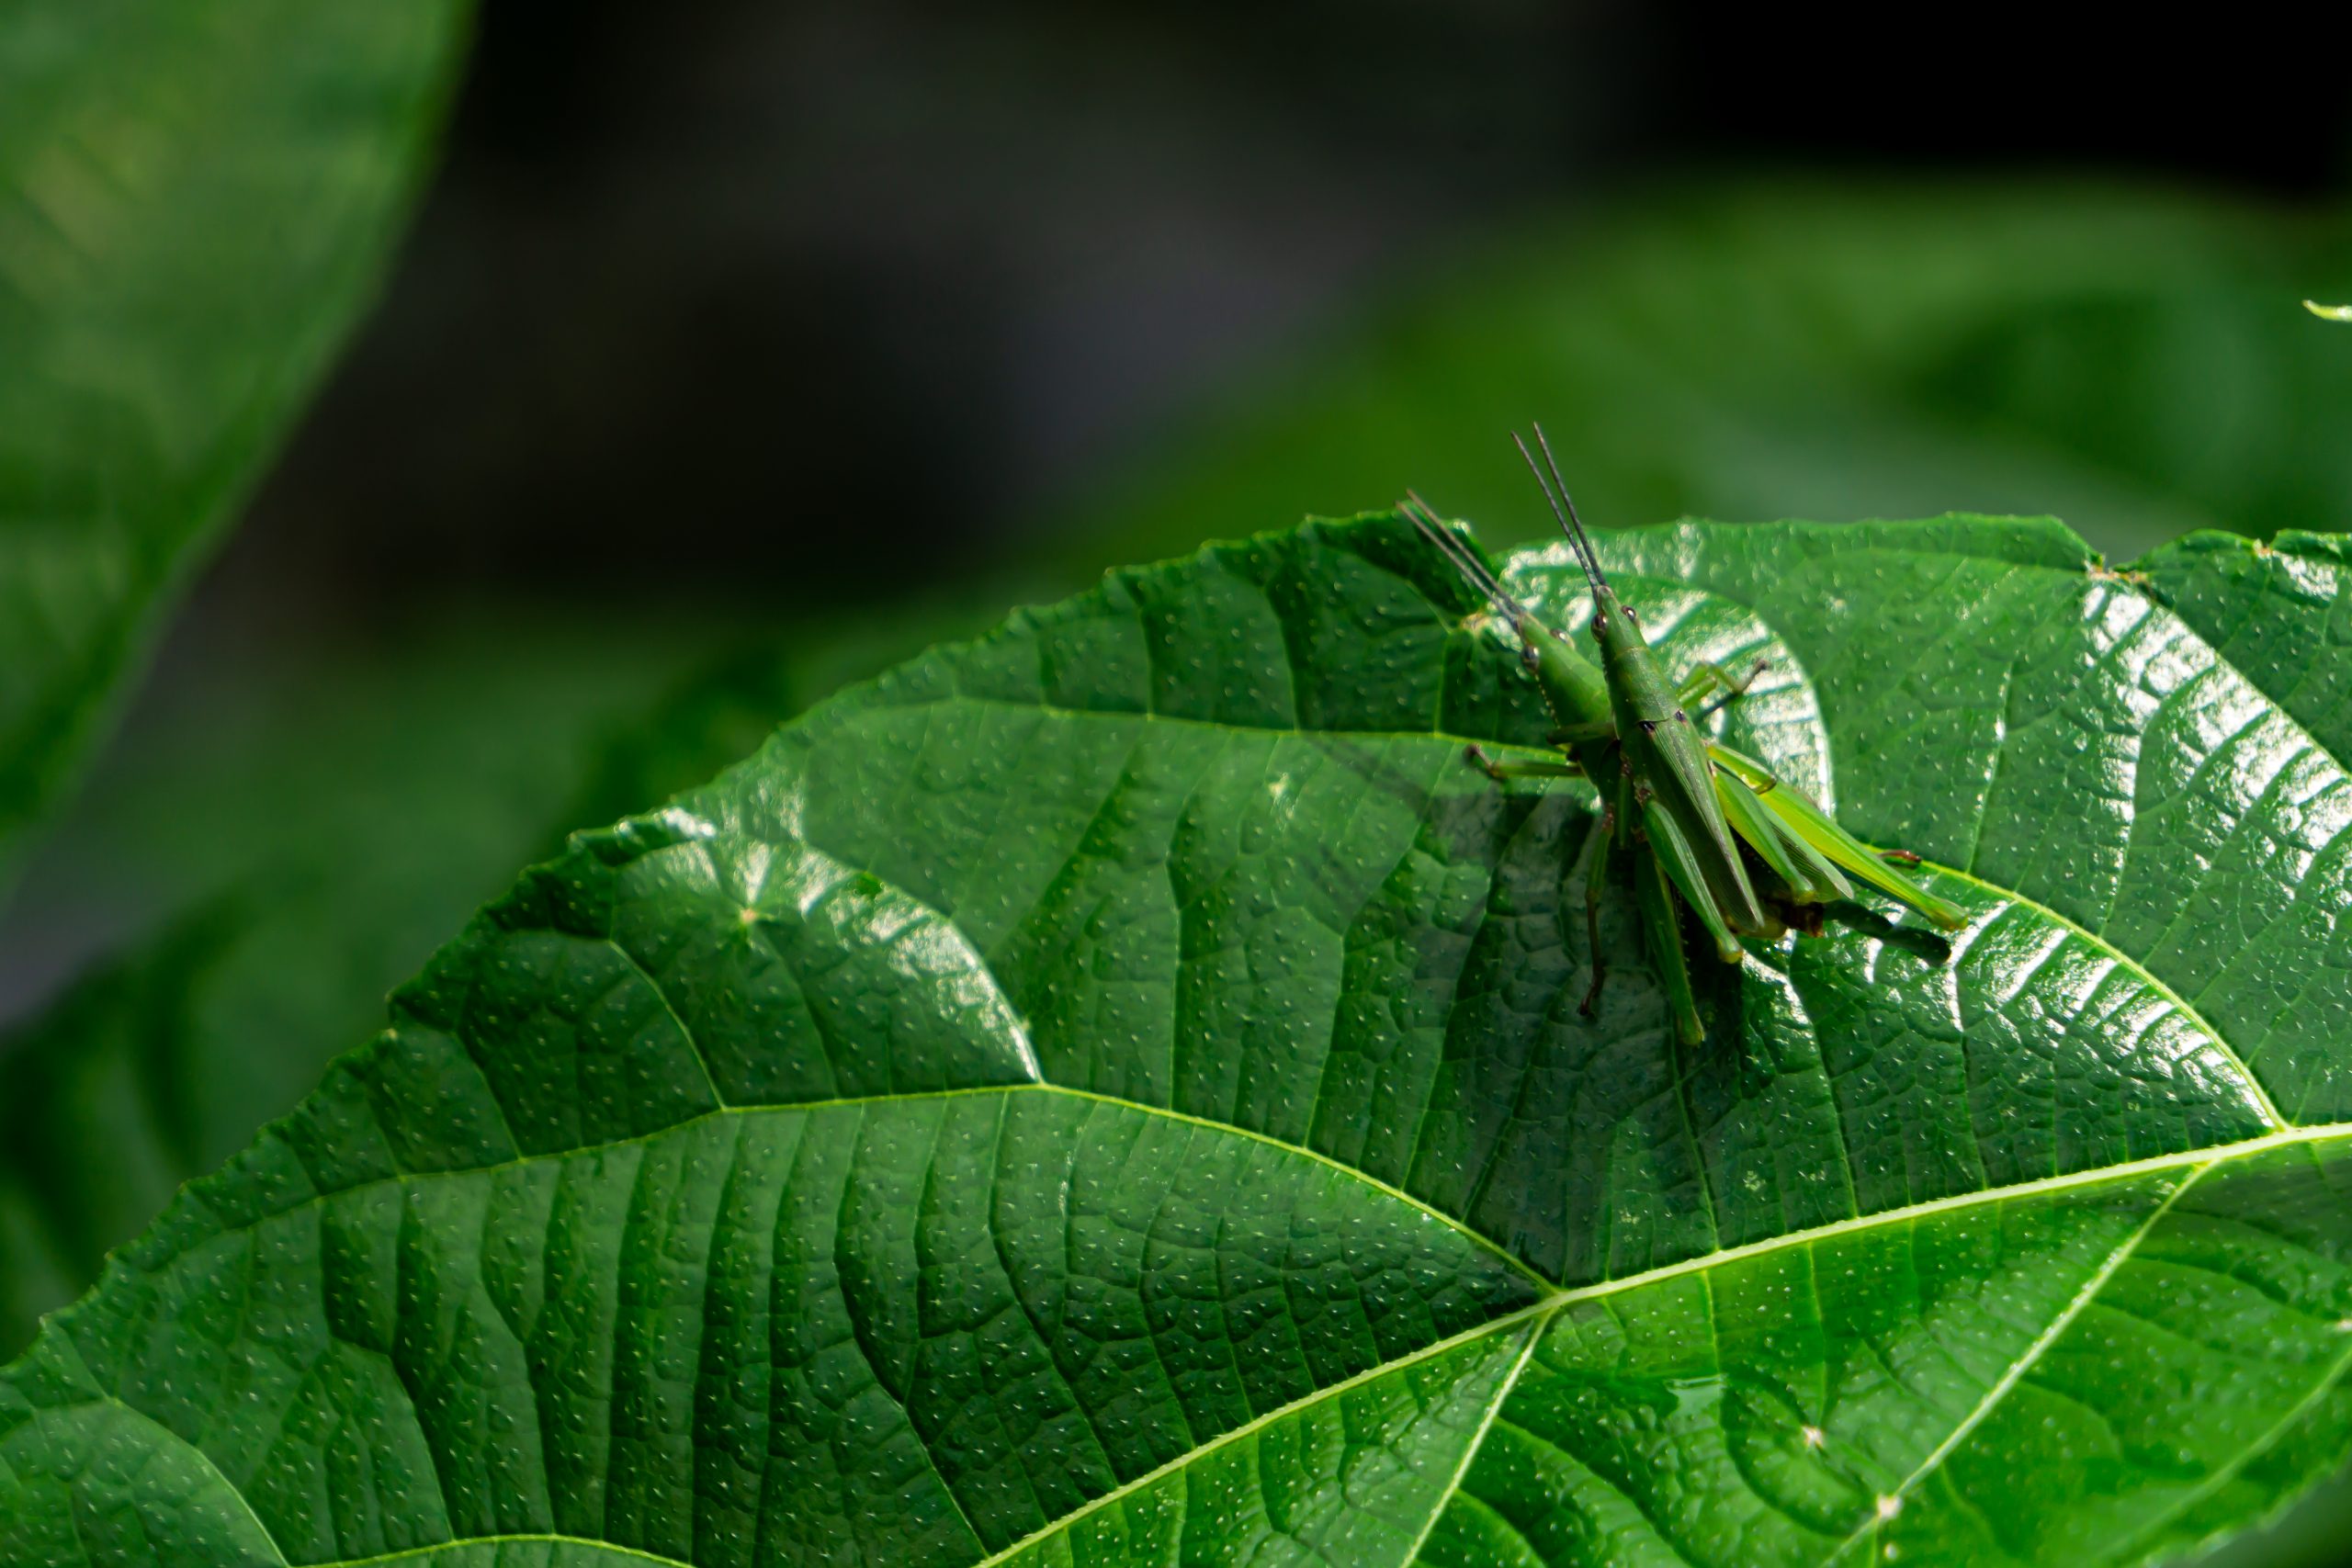 Two Insects on a plant leaf